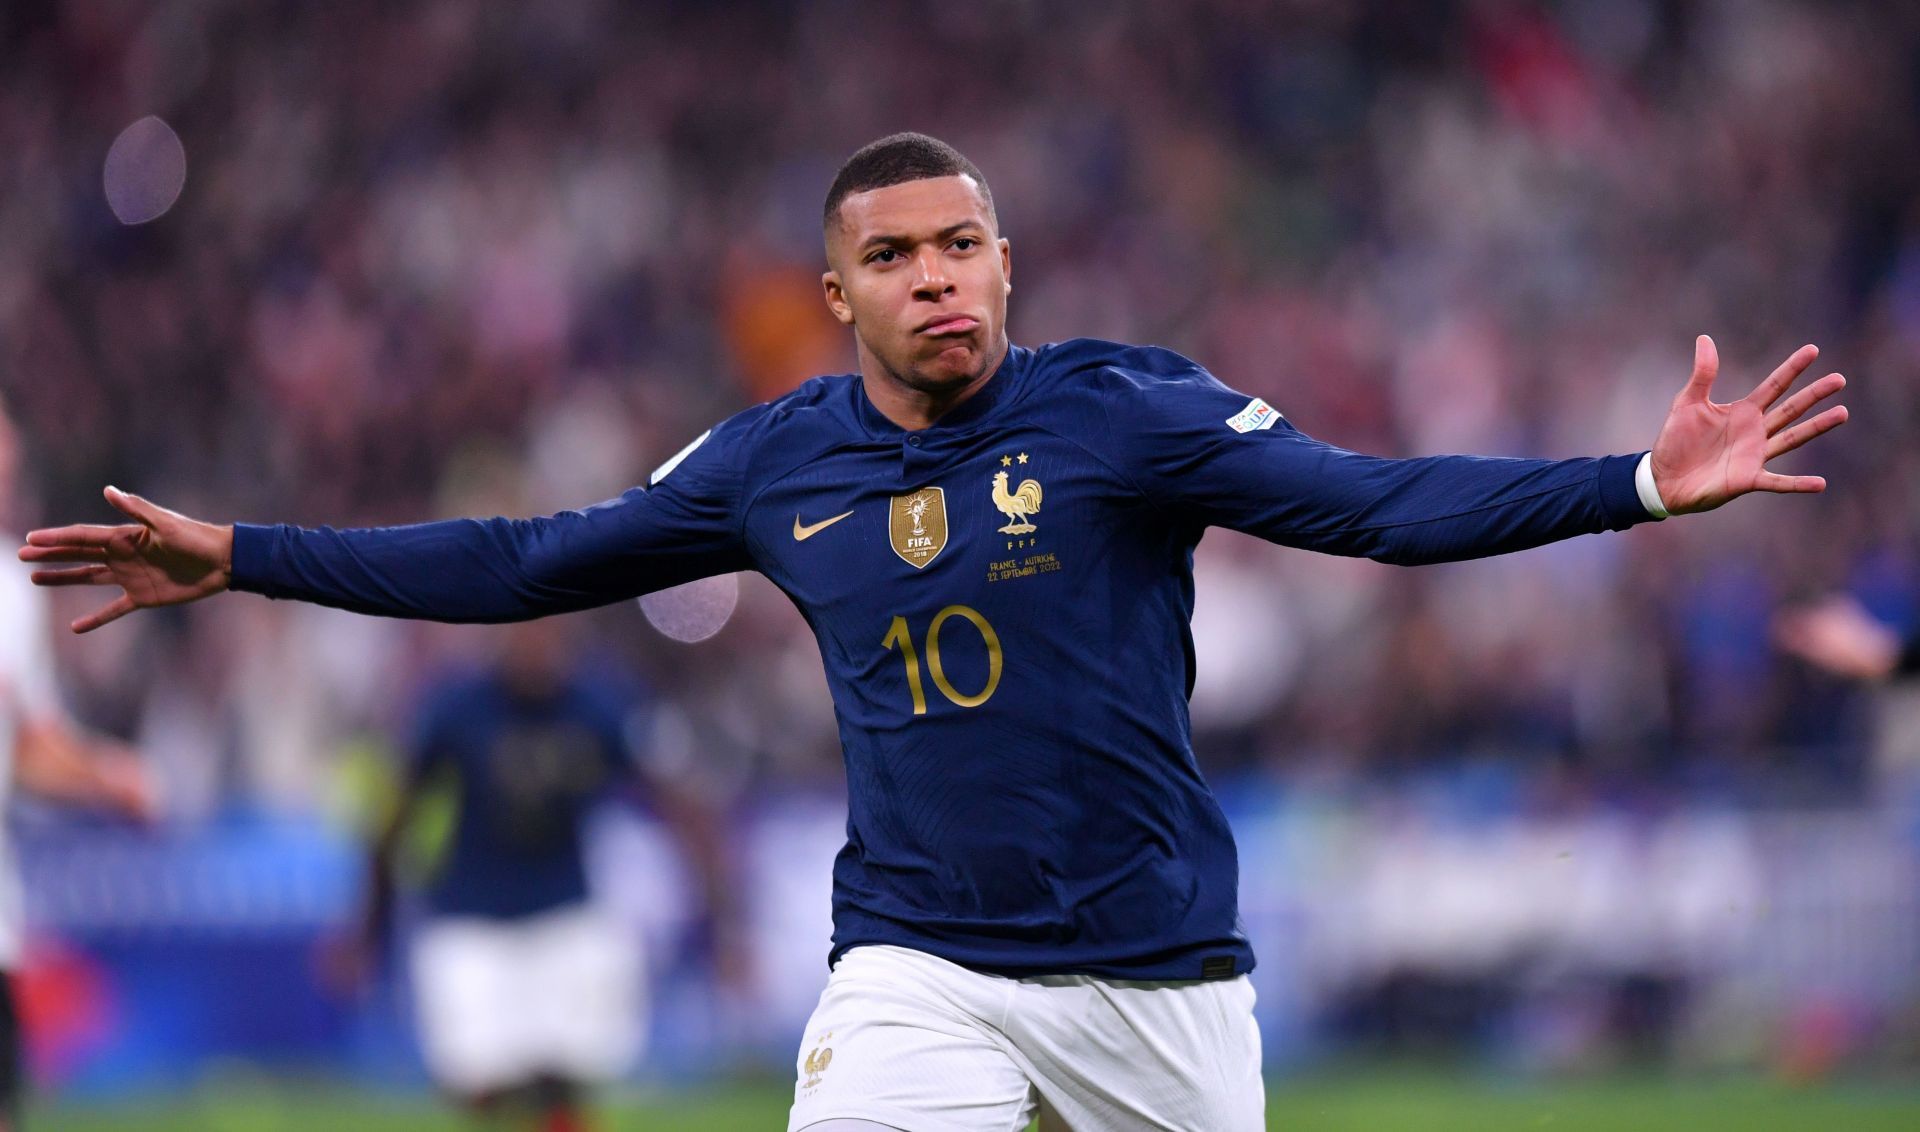 Kylian Mbappe is unlikely to arrive at the Santiago Bernabeu any time soon.